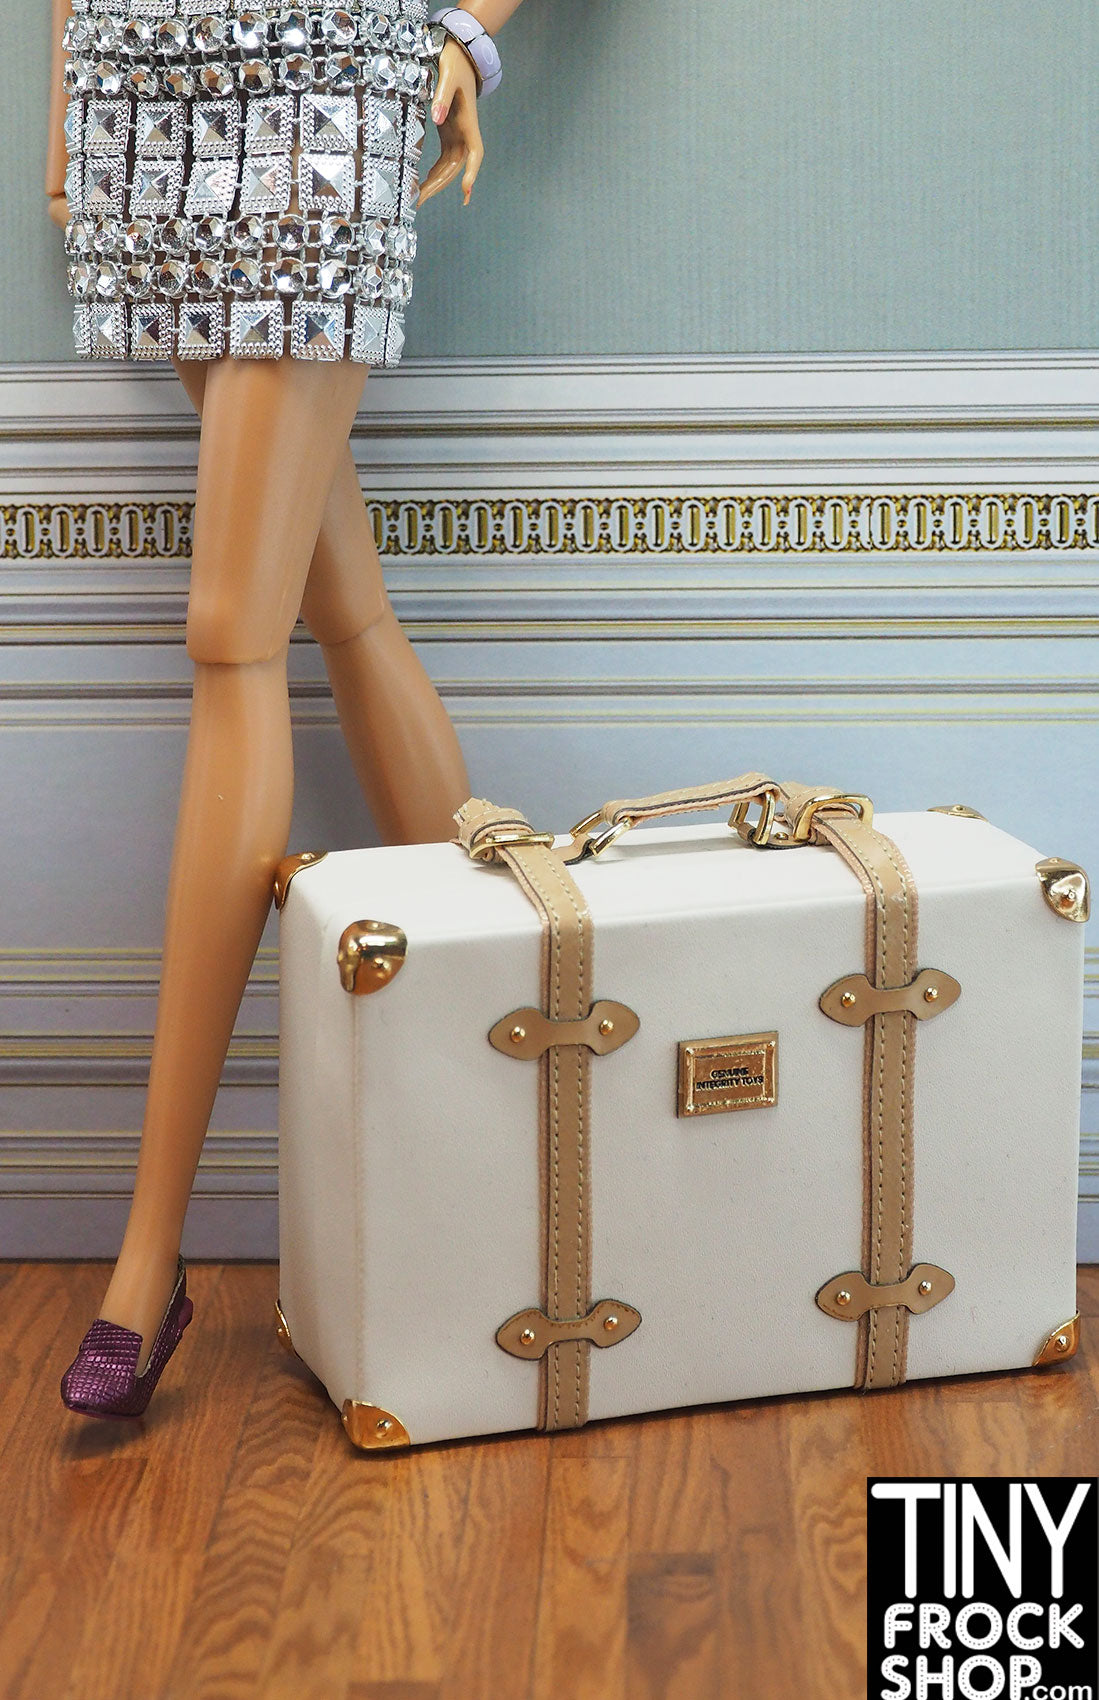 Tiny Frock Shop Integrity Luxe Travels Large Luggage Suitcase